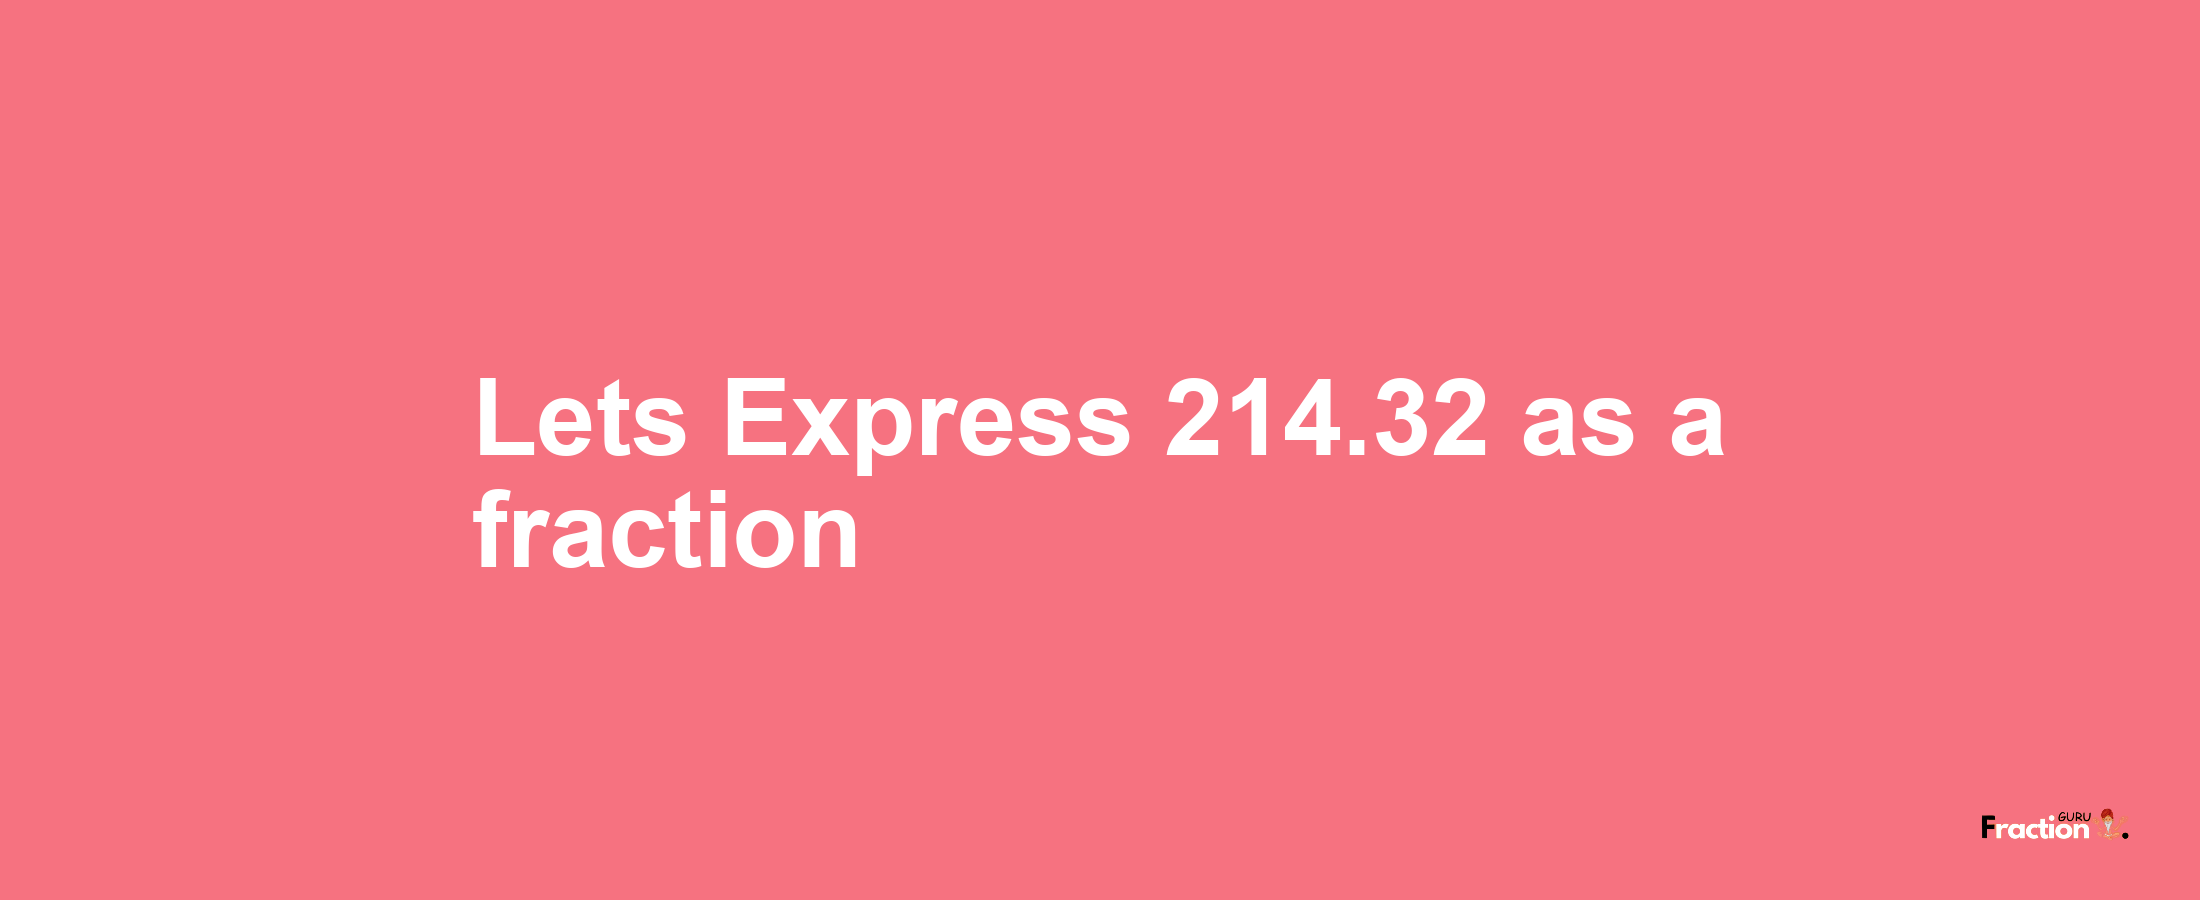 Lets Express 214.32 as afraction